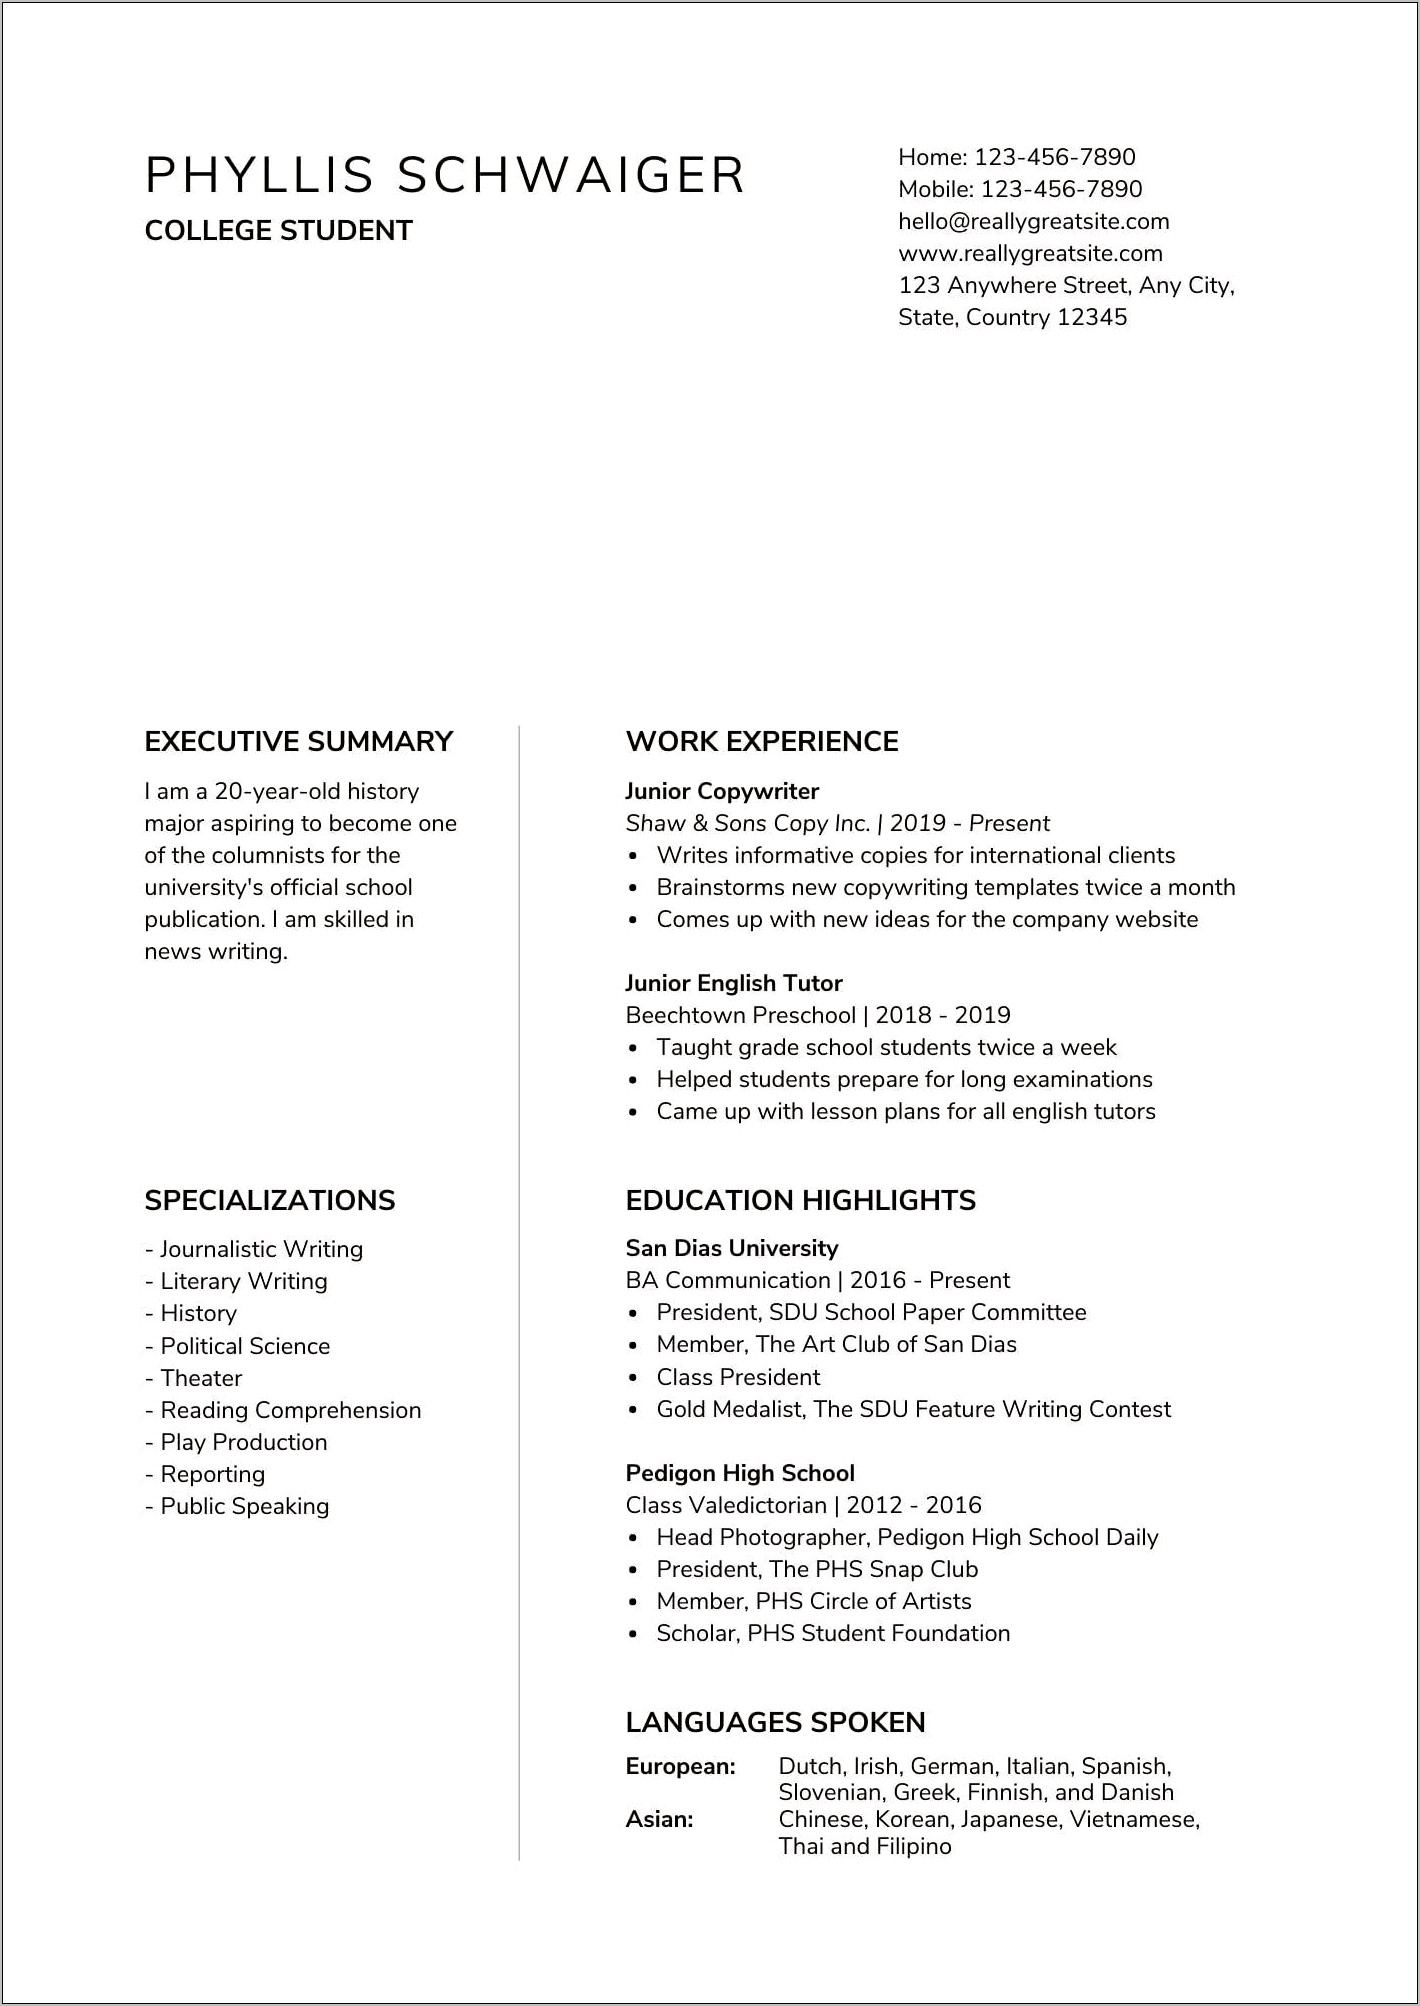 First Job After College Resume